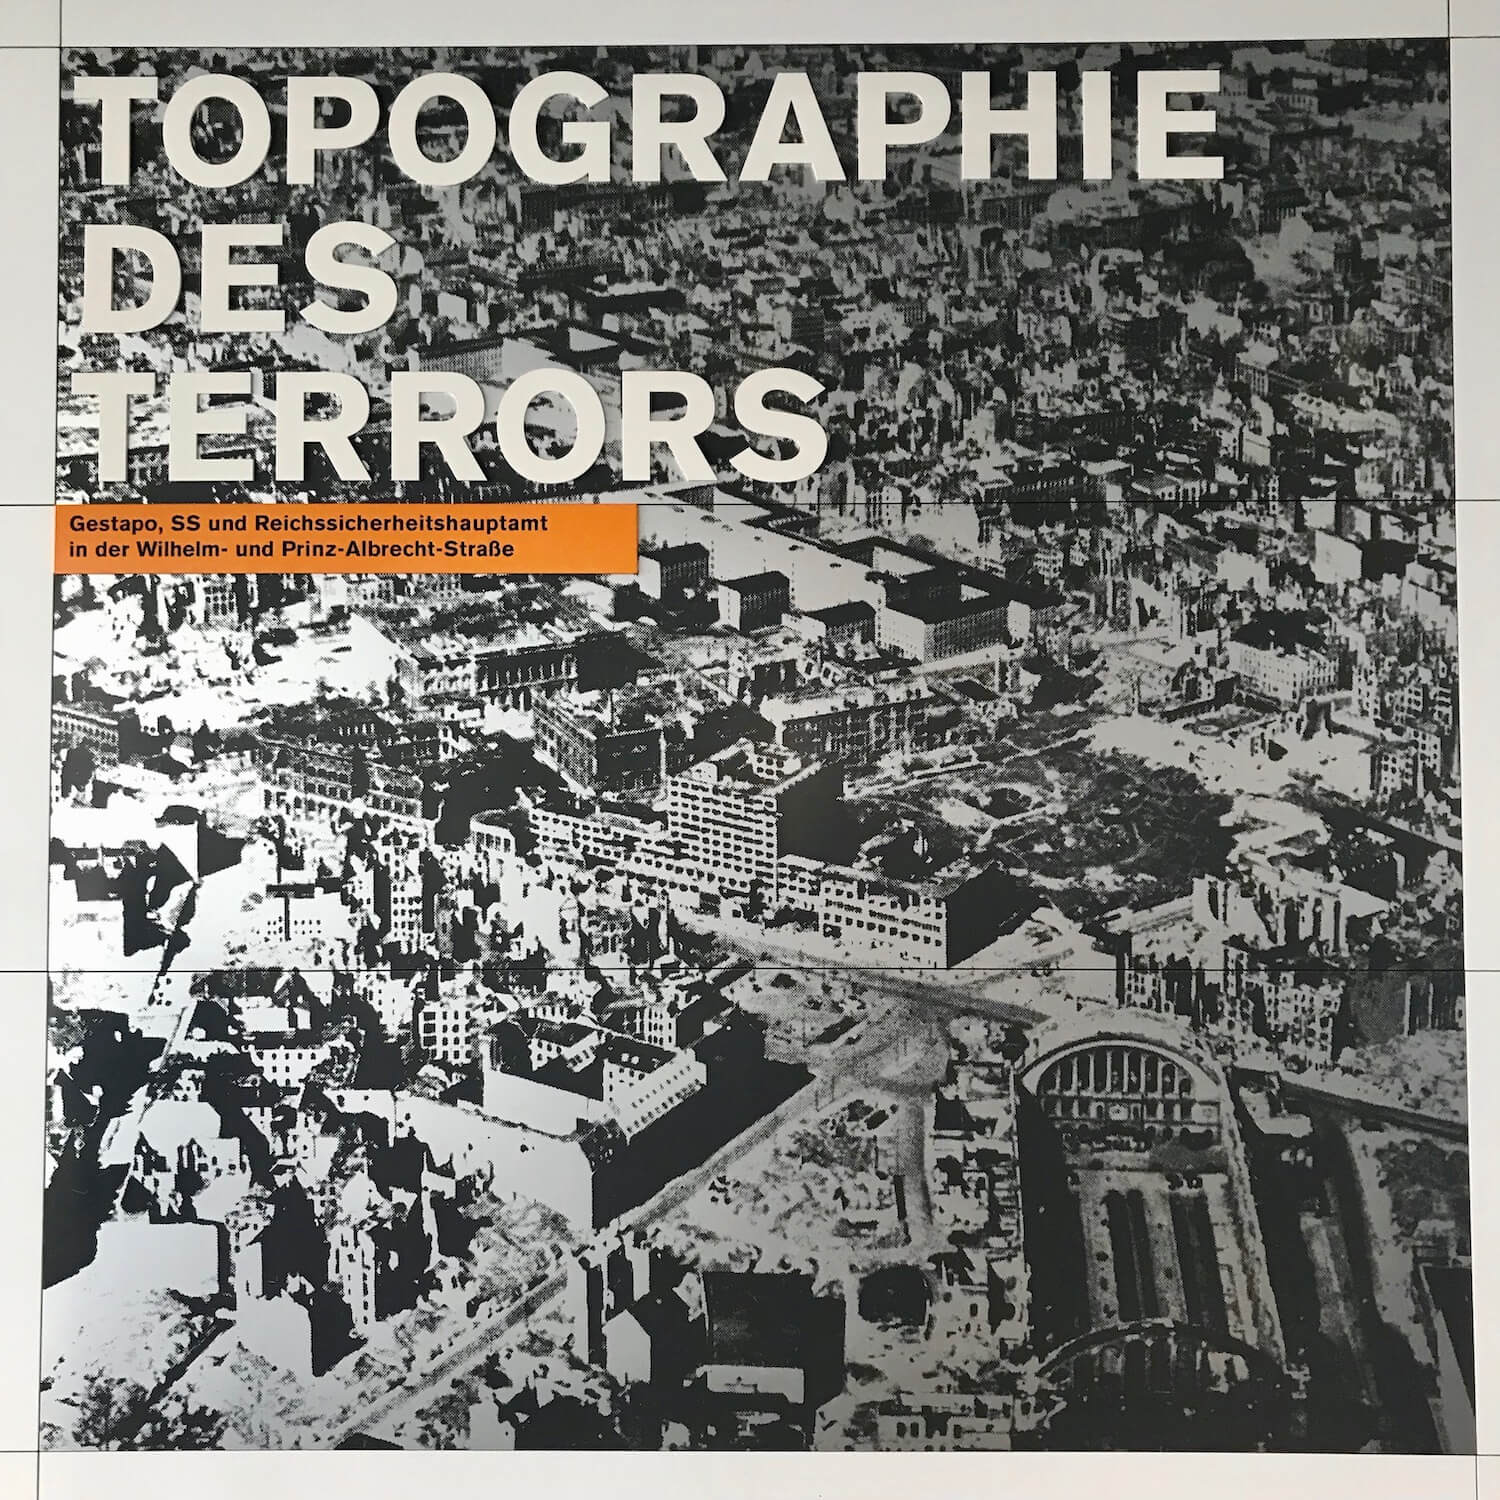 Entrance sign to the Topographies des Terrors exhibit in Berlin, Germany. This square poster shows a black and white photo of Berlin before World War two.